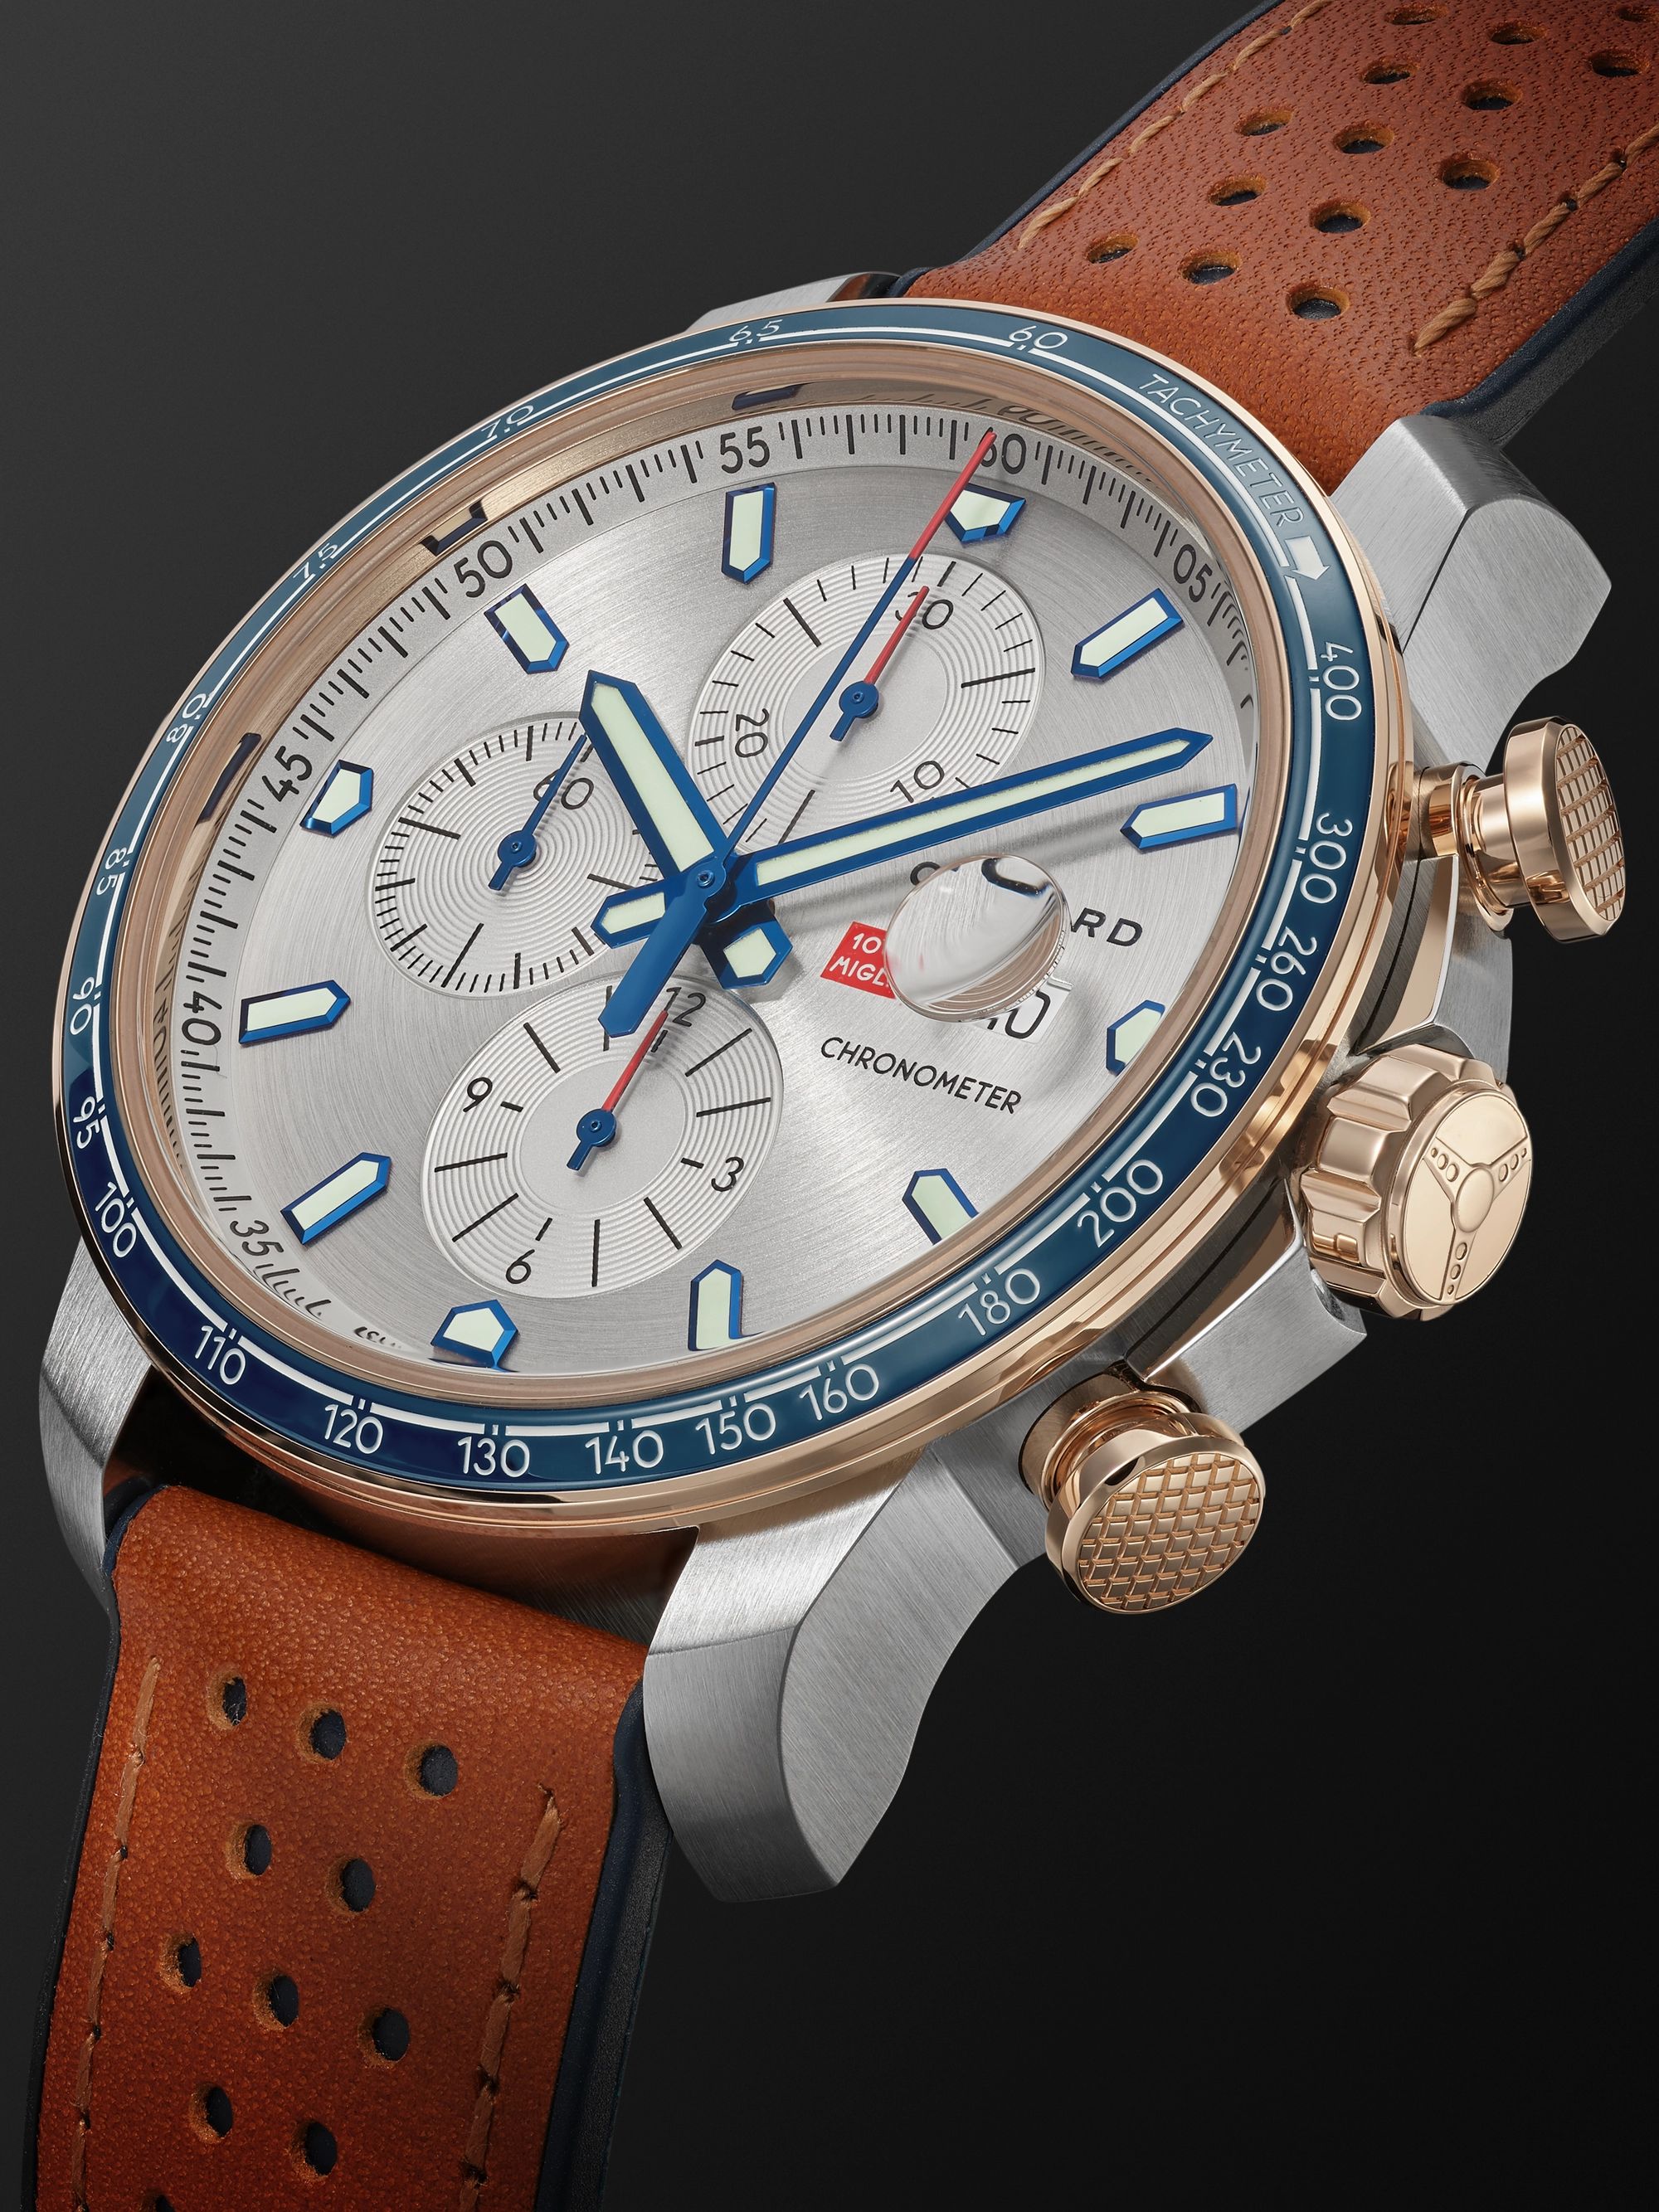 CHOPARD Mille Miglia GTS Limited-Edition Automatic Chronograph 44mm Stainless Steel and Leather Watch, Ref. No. 168571-6004